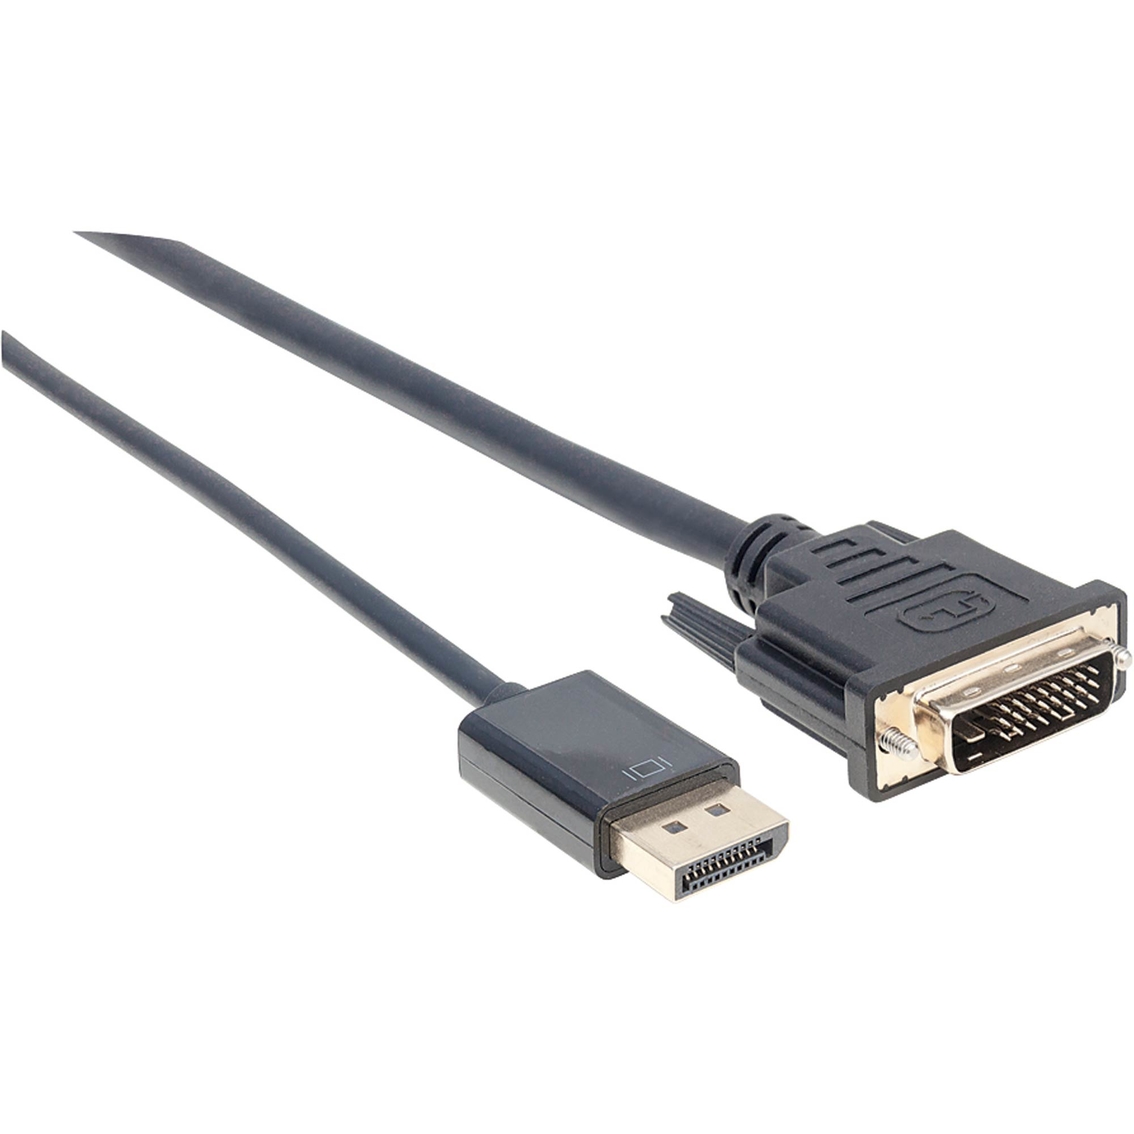 Manhattan DisplayPort 1.2a to DVI 10ft Cable 152136